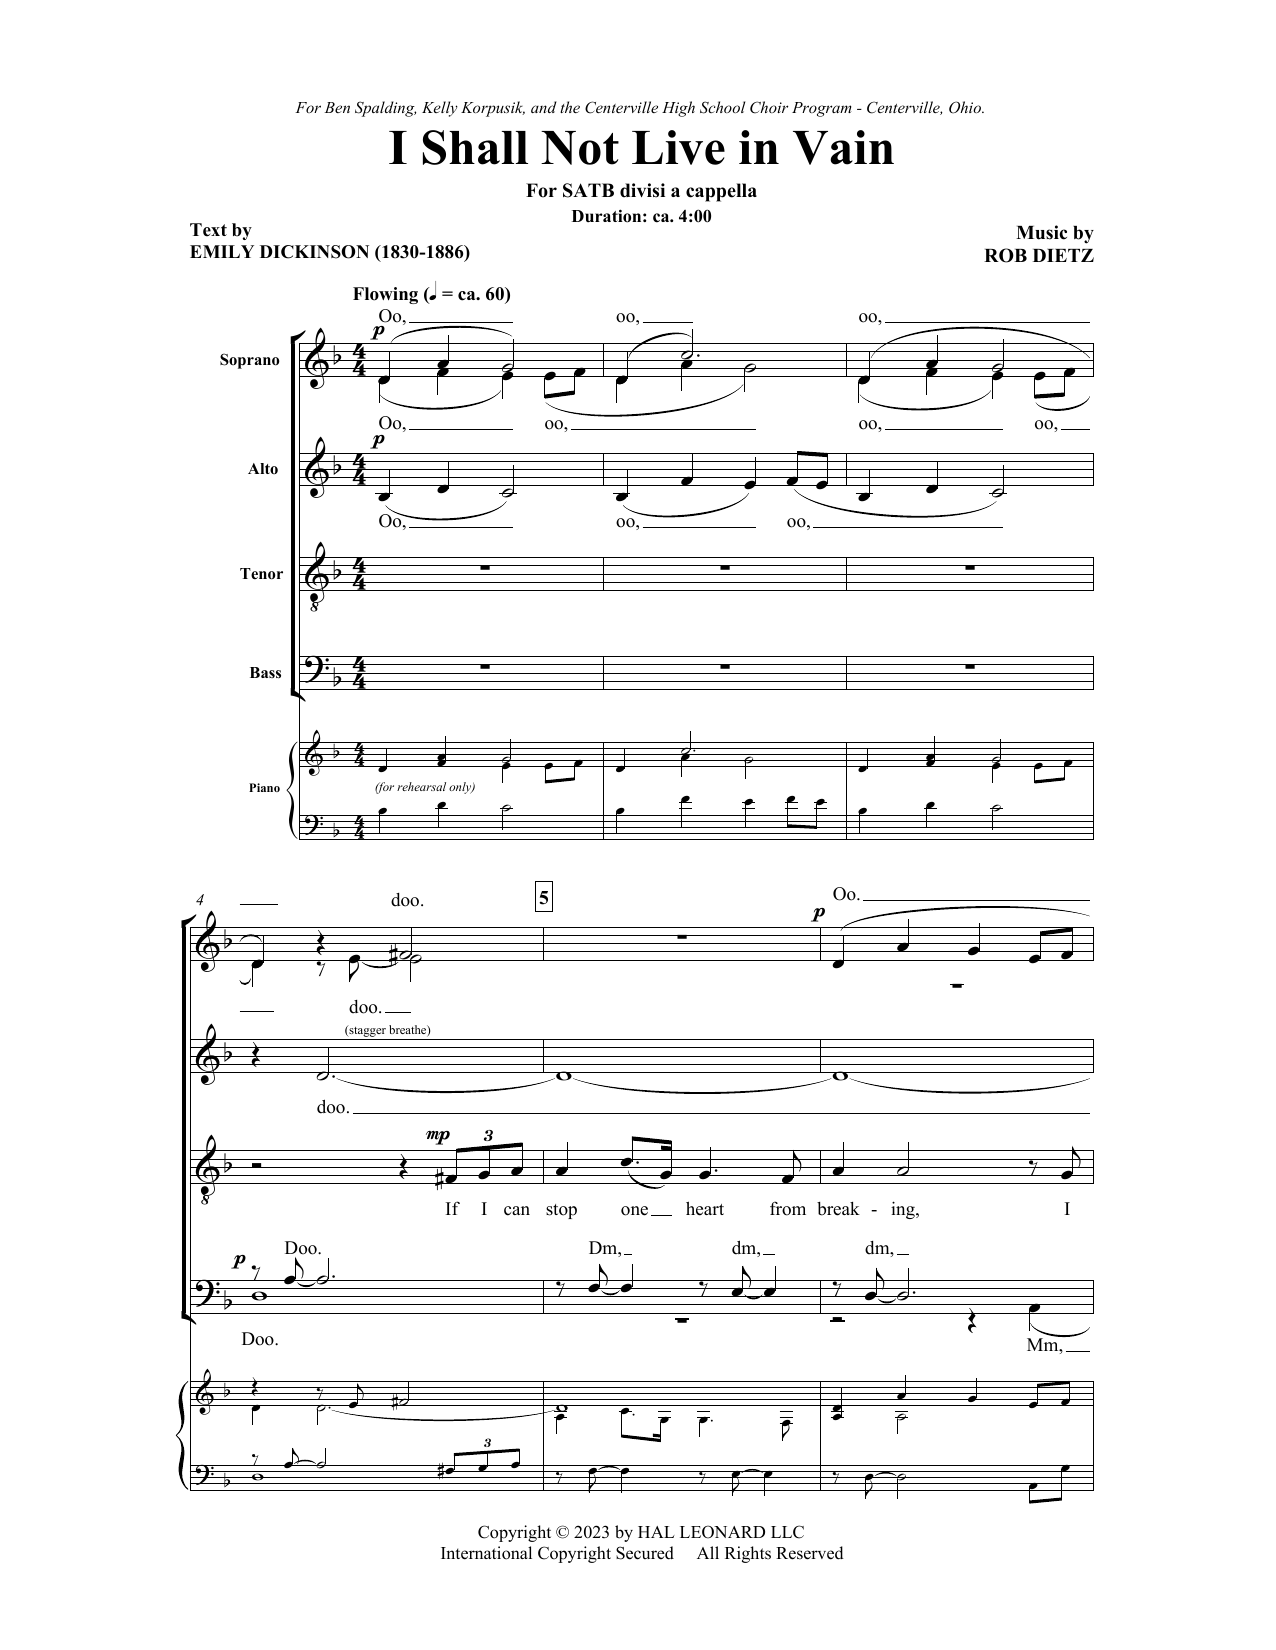 Rob Dietz I Shall Not Live In Vain sheet music notes printable PDF score